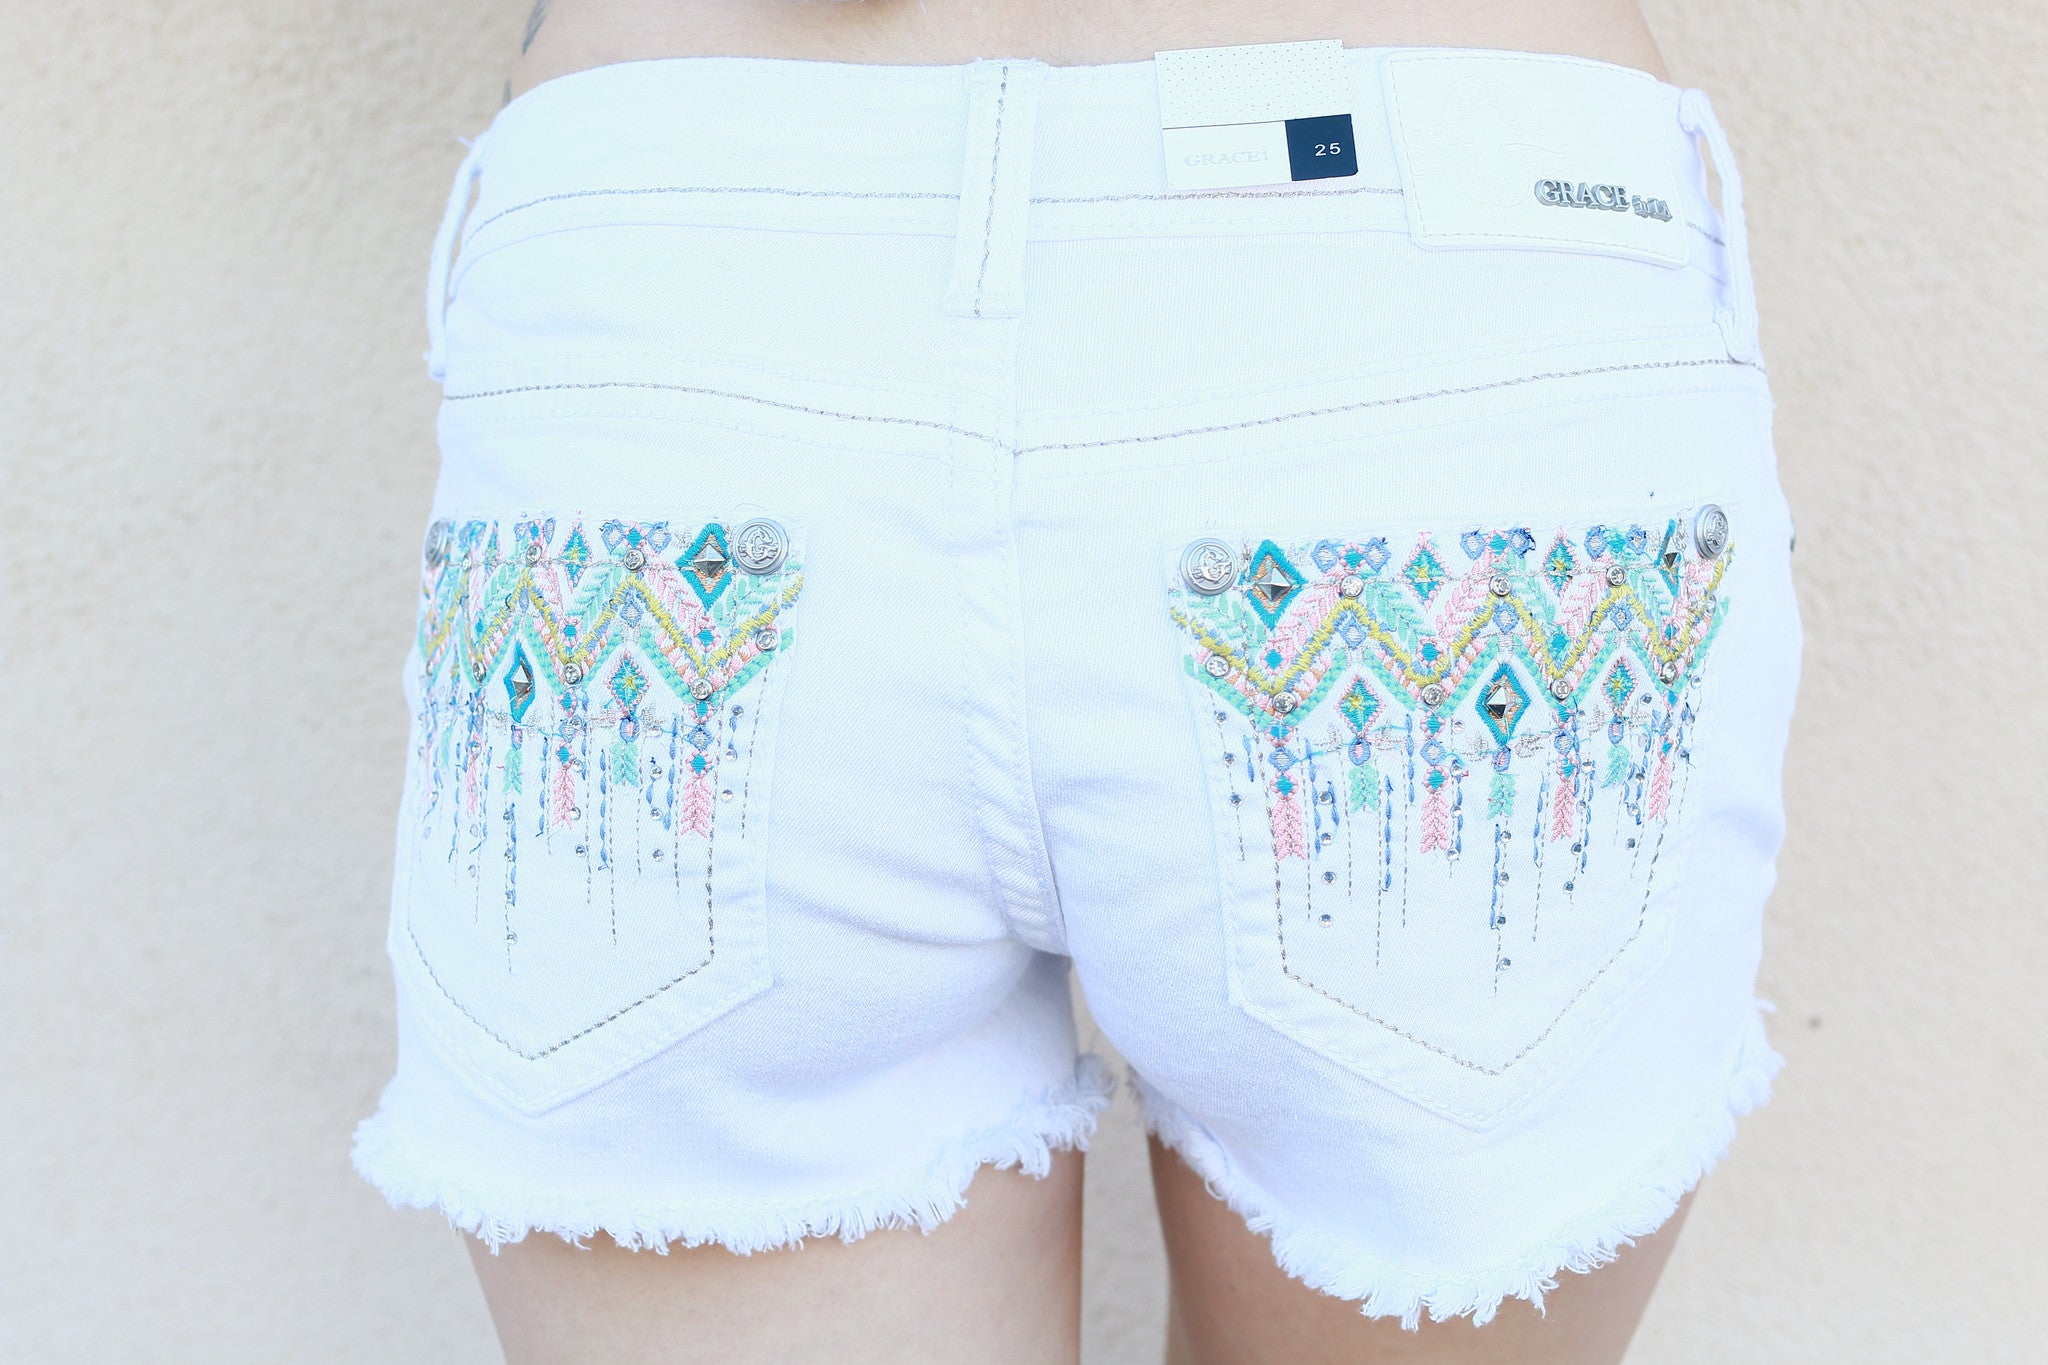 GRACE IN L.A. SPRING SHOWERS WHITE CUTOFF SHORTS - decadenceboutique - 3